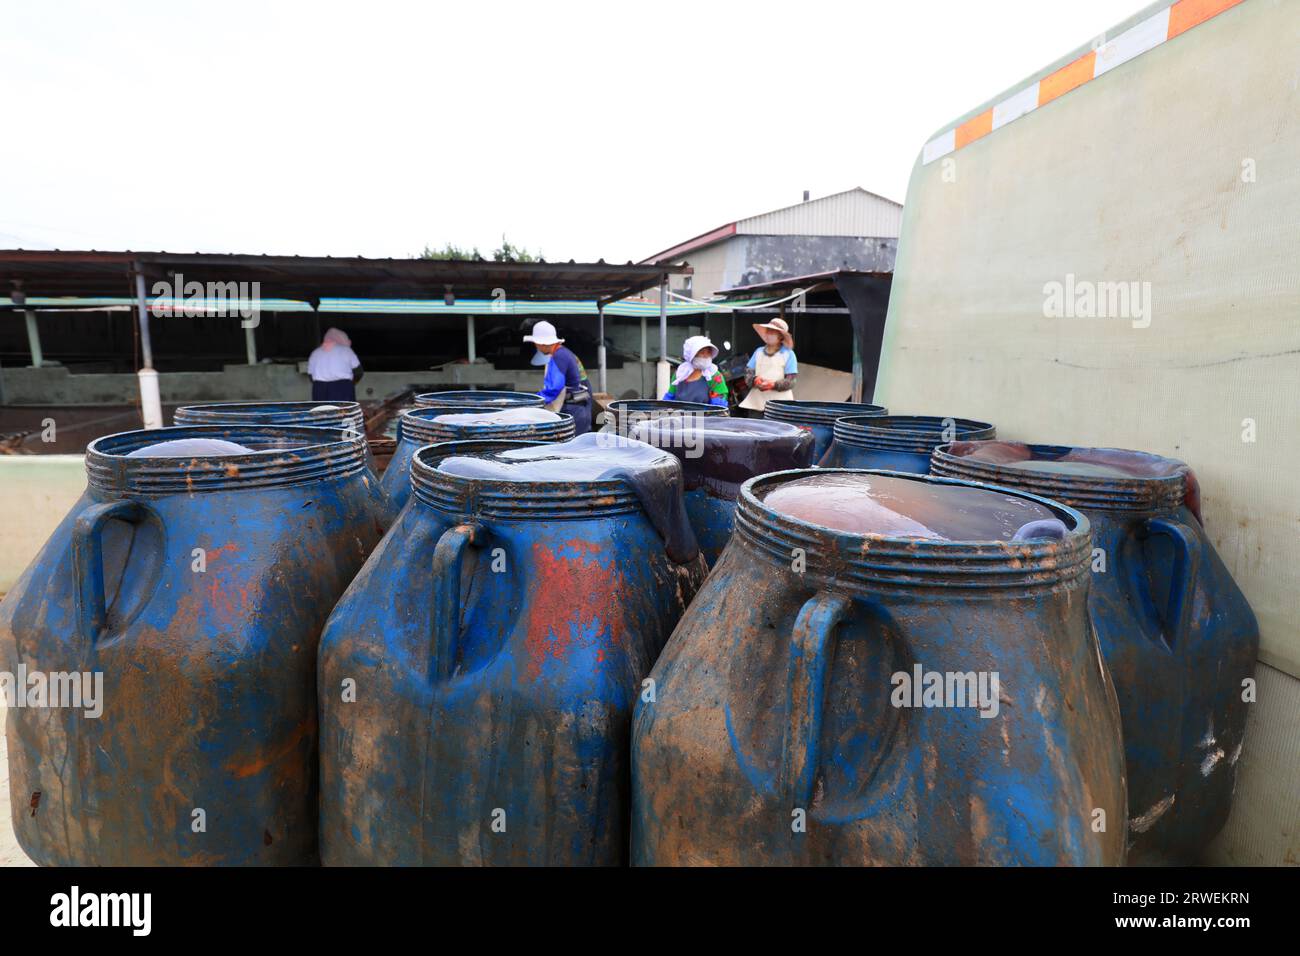 Plastic buckets containing jellyfish are in a seafood processing plant in North China Stock Photo